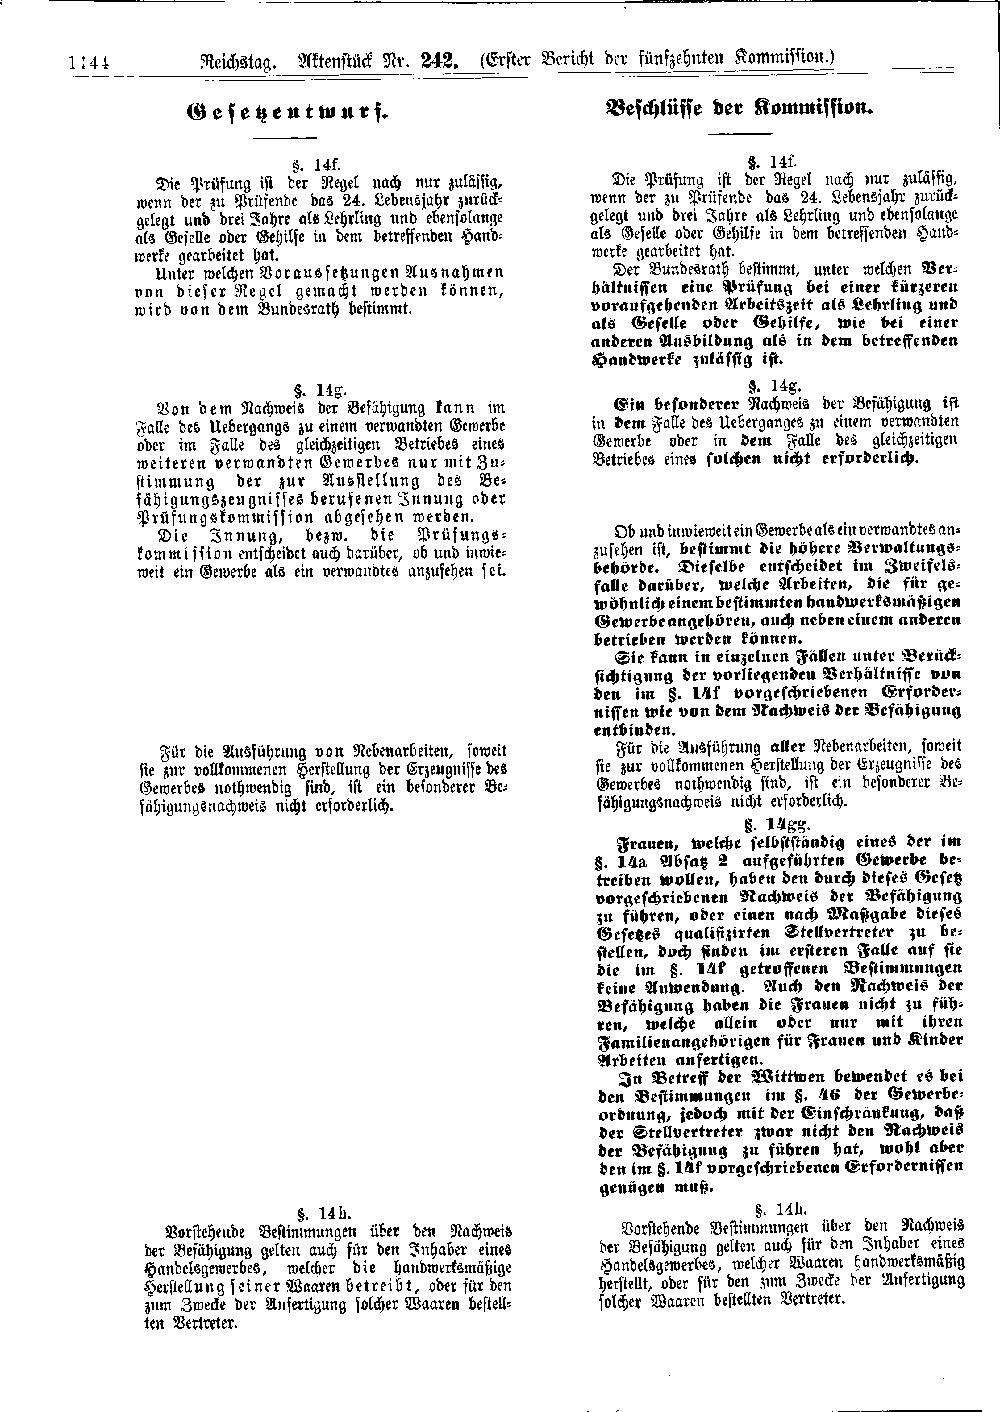 Scan of page 1144